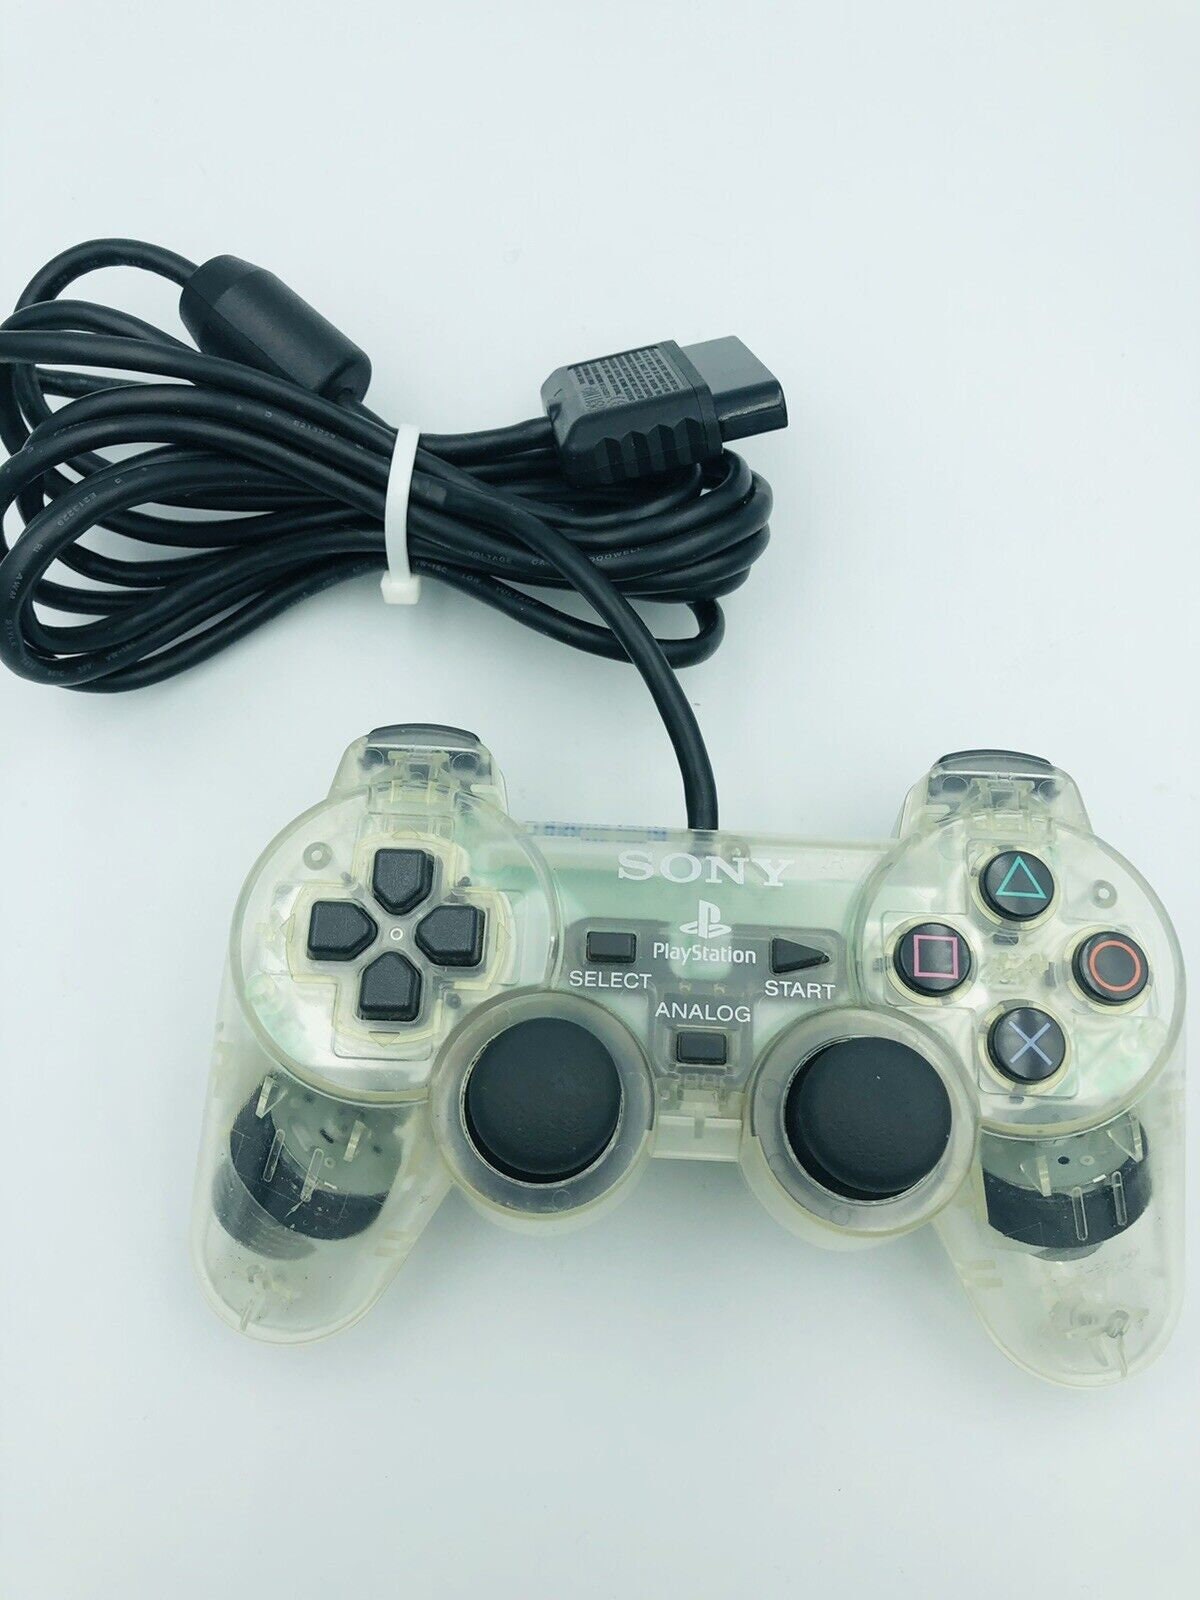 CLEAR Playstation 2 2 Controller SCPH-10010 - Etsy